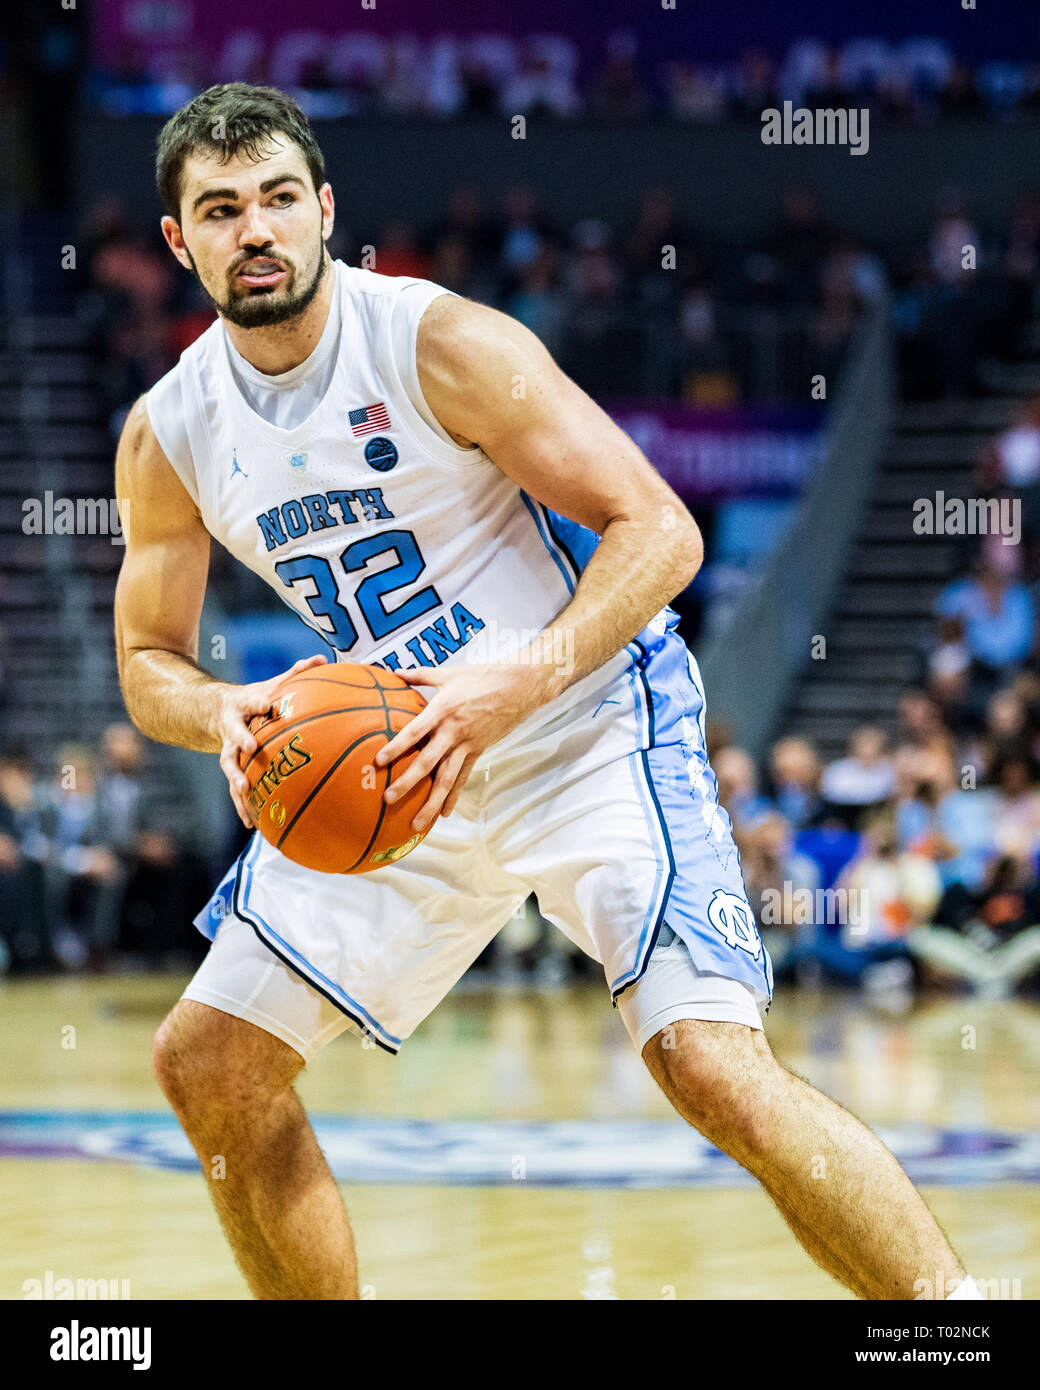 North Carolina Tar Heels forward Luke Maye (32) during the ACC College Basketball Tournament game between the Louisville Cardinals and the North Carolina Tar Heels at the Spectrum Center on Thursday March 14, 2019 in Charlotte, NC. Jacob Kupferman/CSM Stock Photo